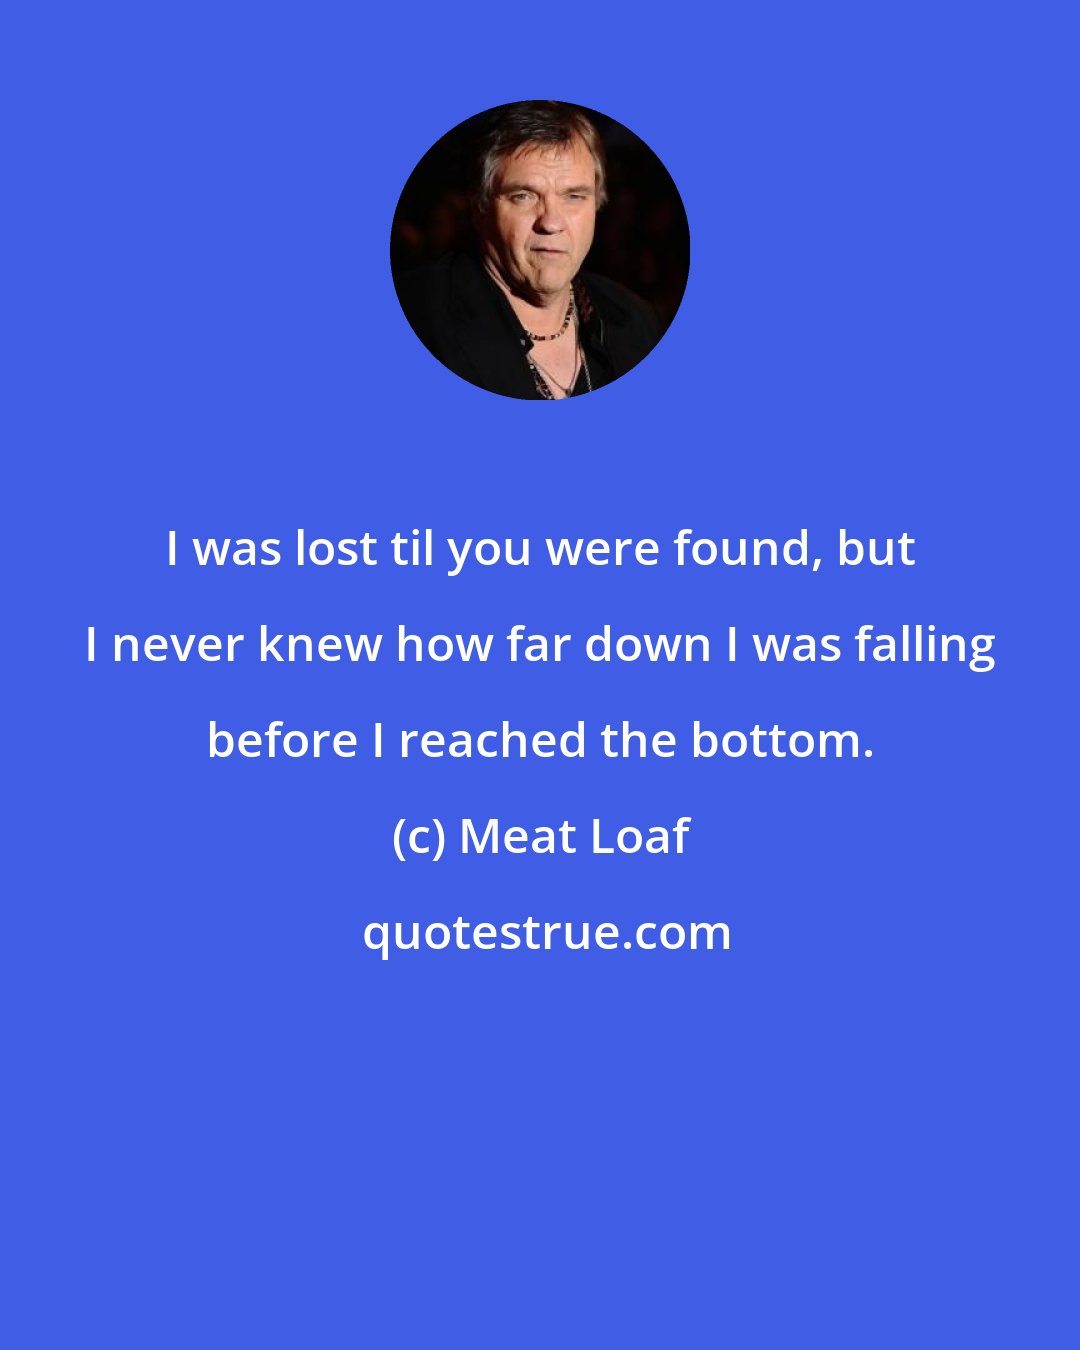 Meat Loaf: I was lost til you were found, but I never knew how far down I was falling before I reached the bottom.